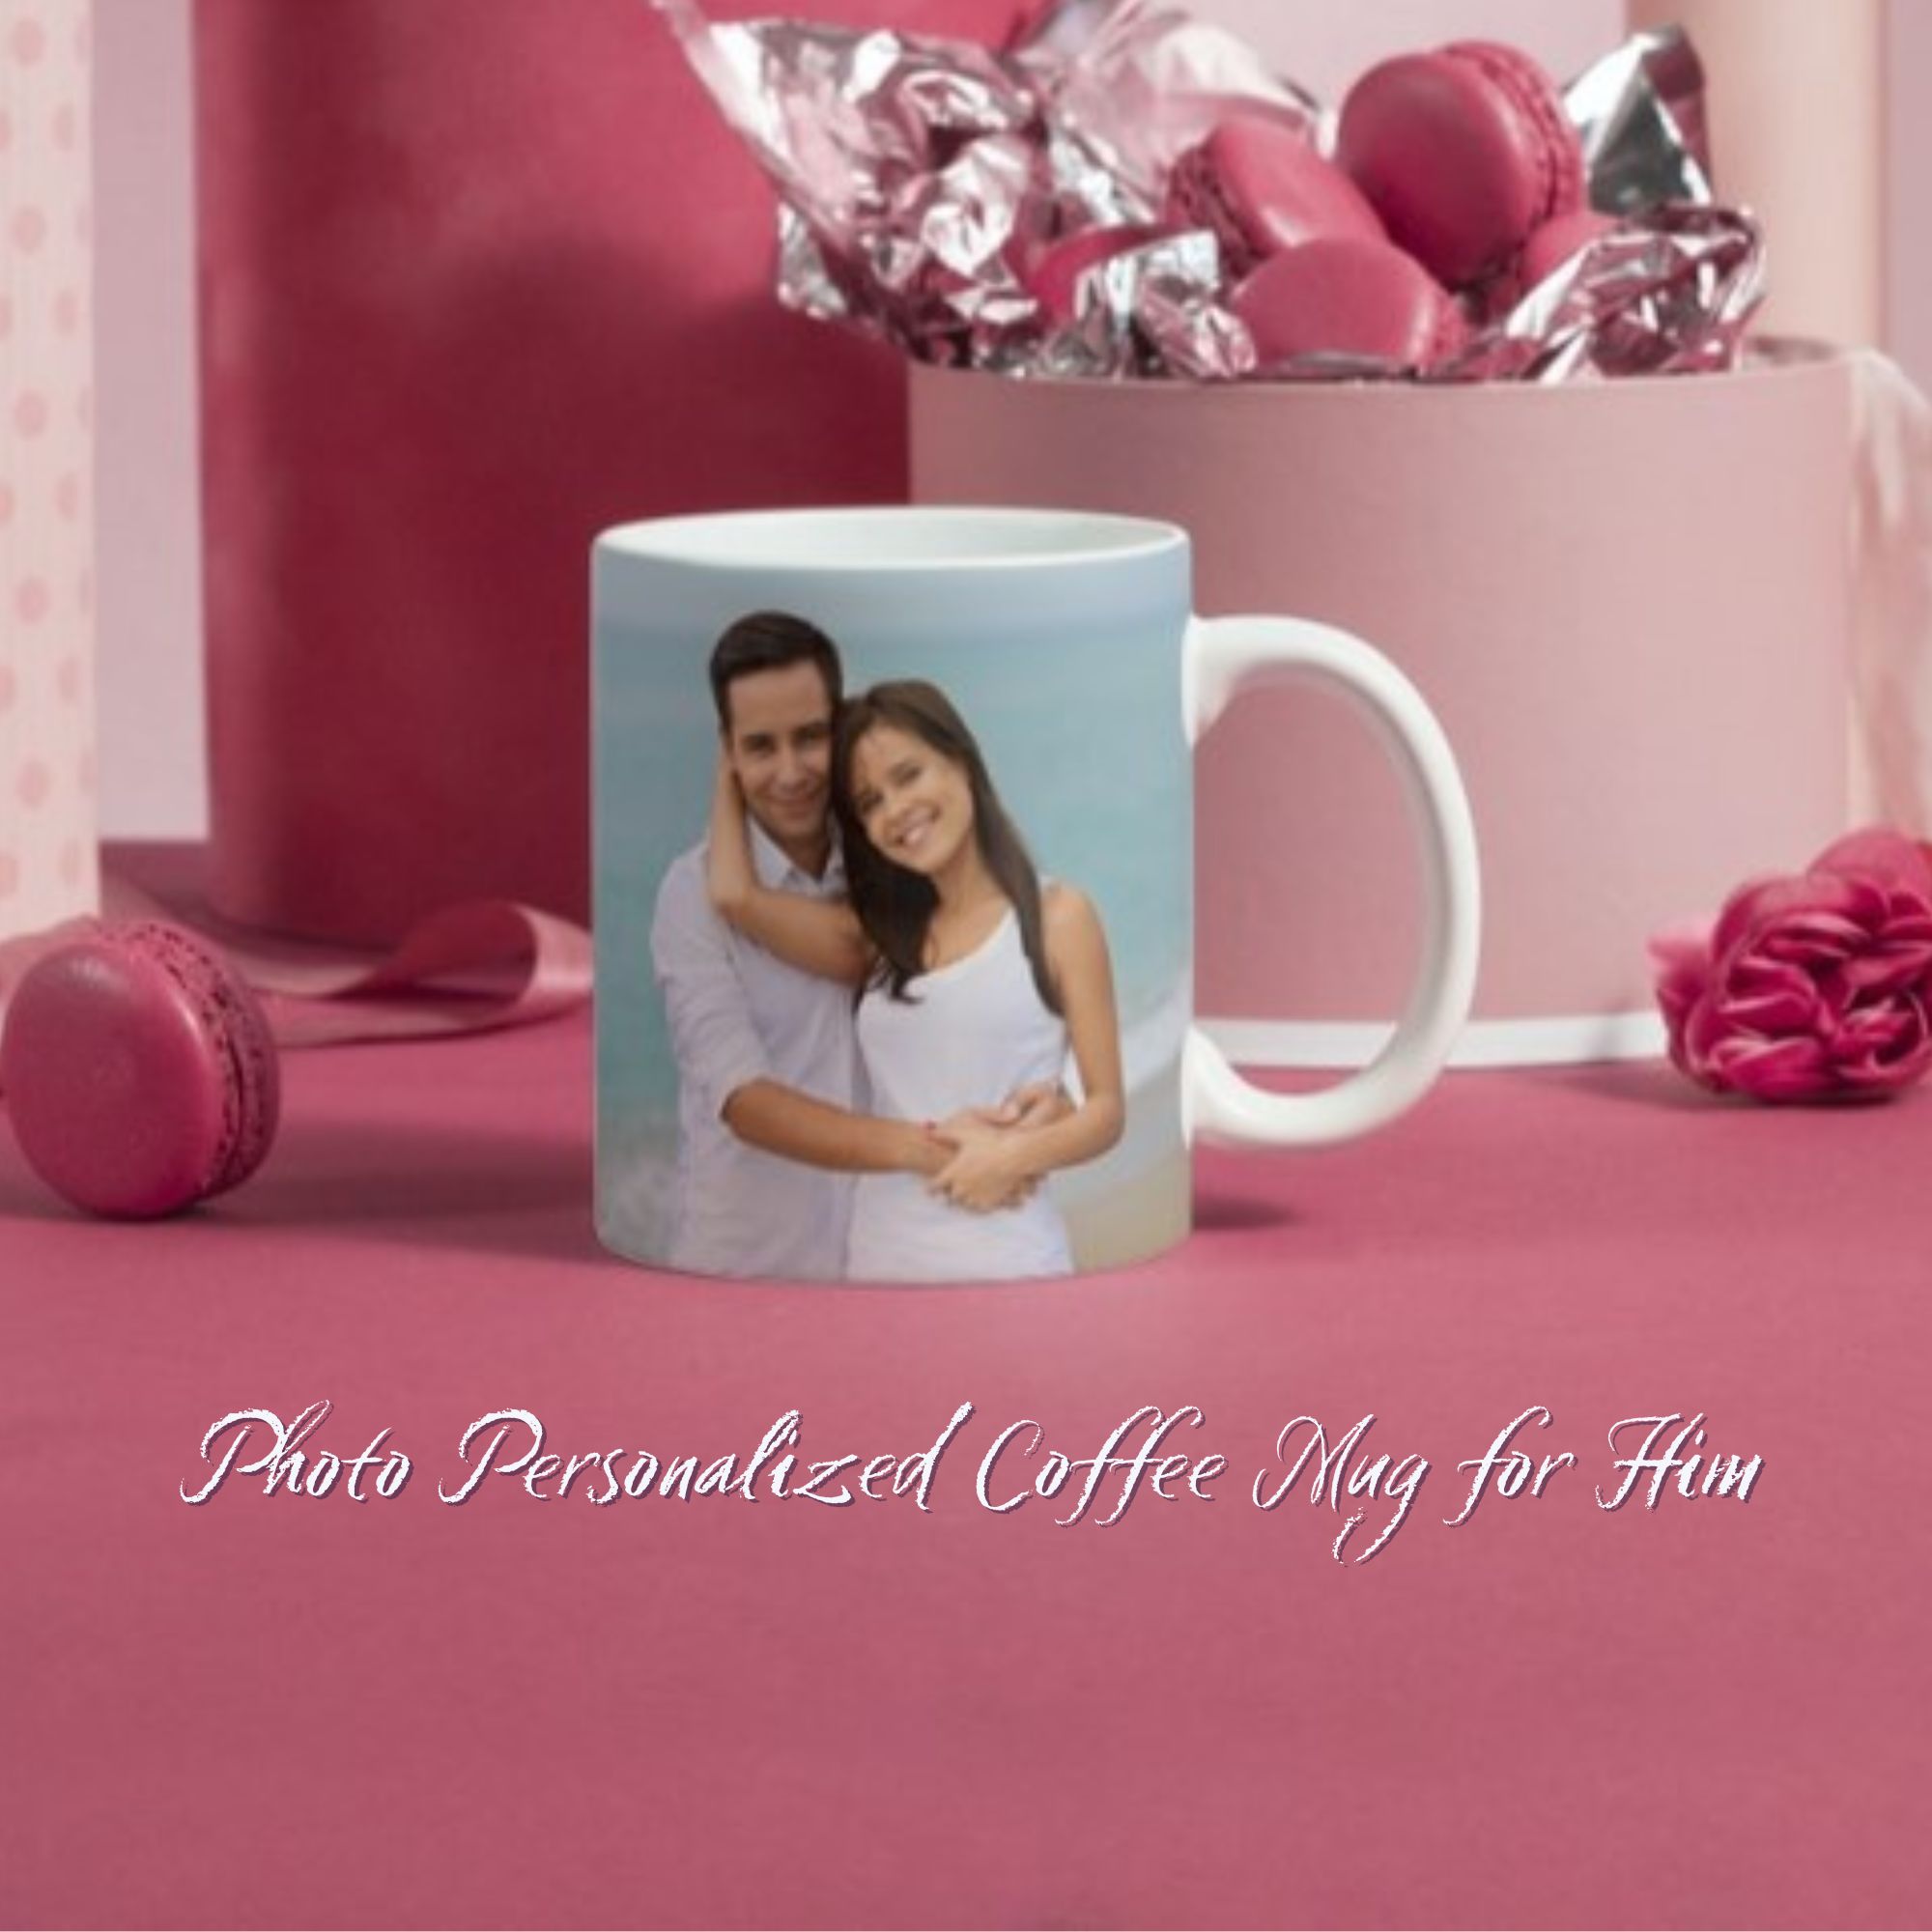 Mug filled with picture Personalized for him